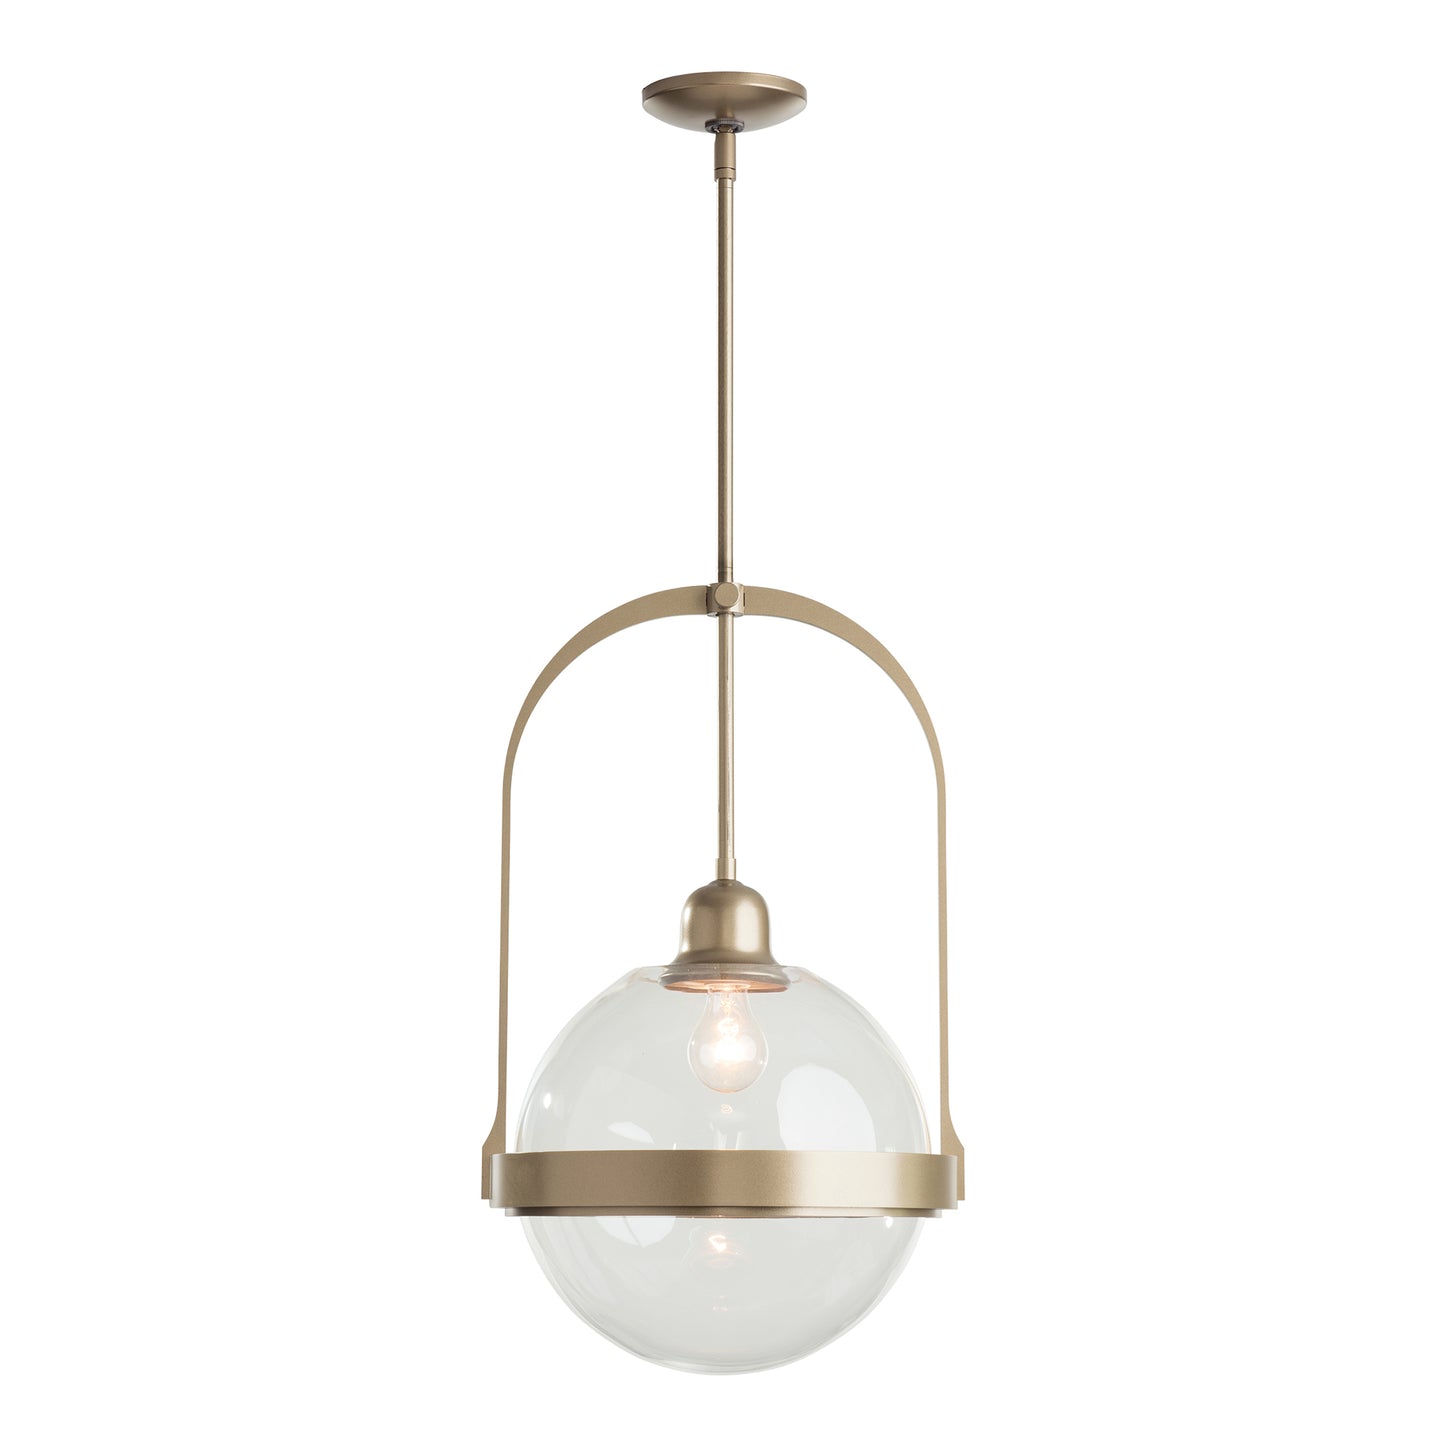 The Hubbardton Forge Atlas Mini Pendant is a handcrafted in Vermont brass pendant light featuring a clear glass globe.